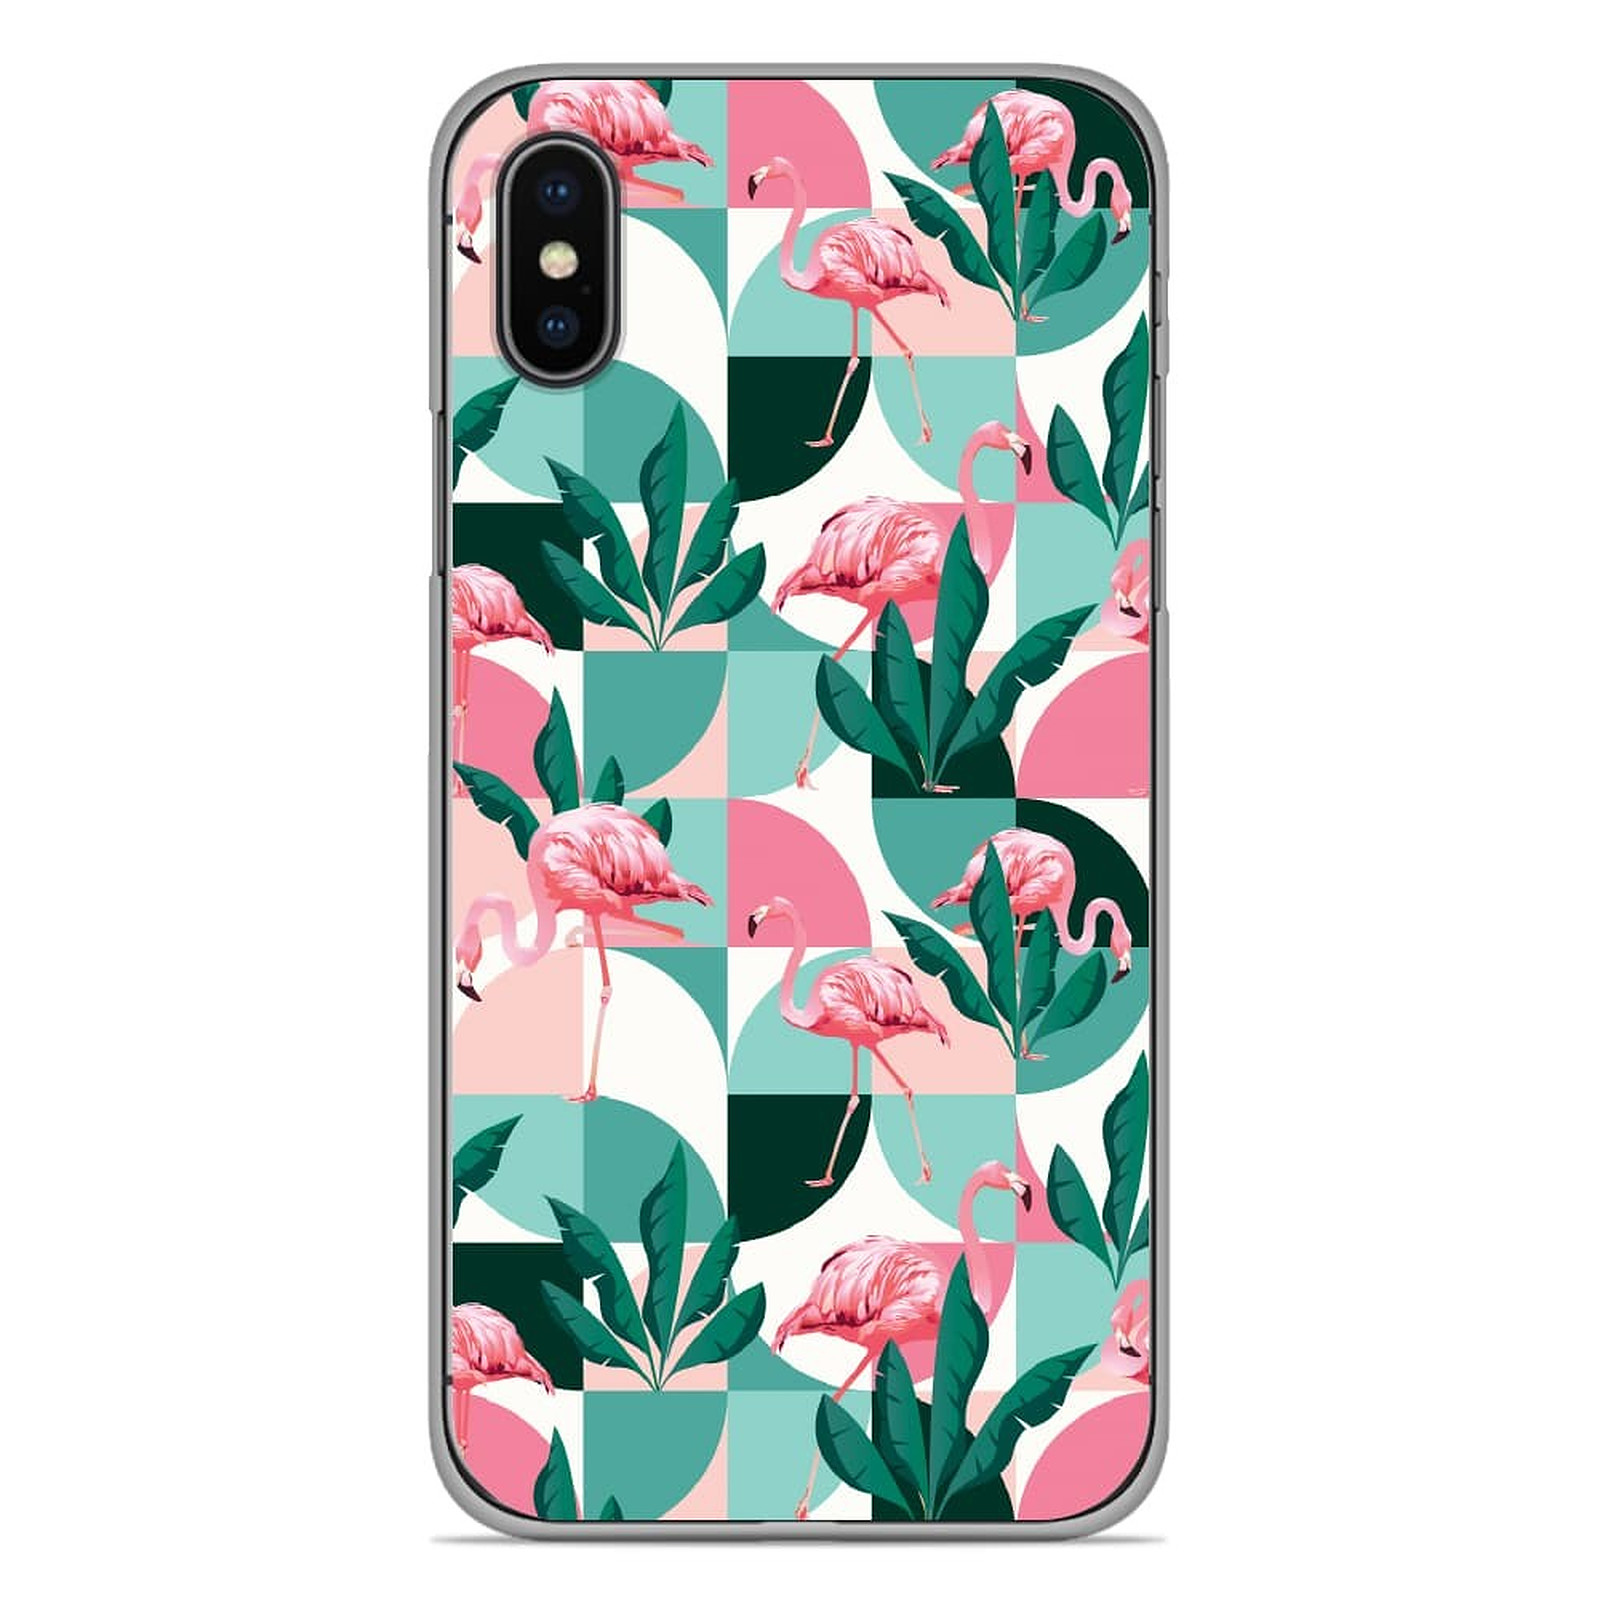 1001 Coques Coque silicone gel Apple iPhone X / XS motif Flamants Roses ge´ome´trique - Coque telephone 1001Coques